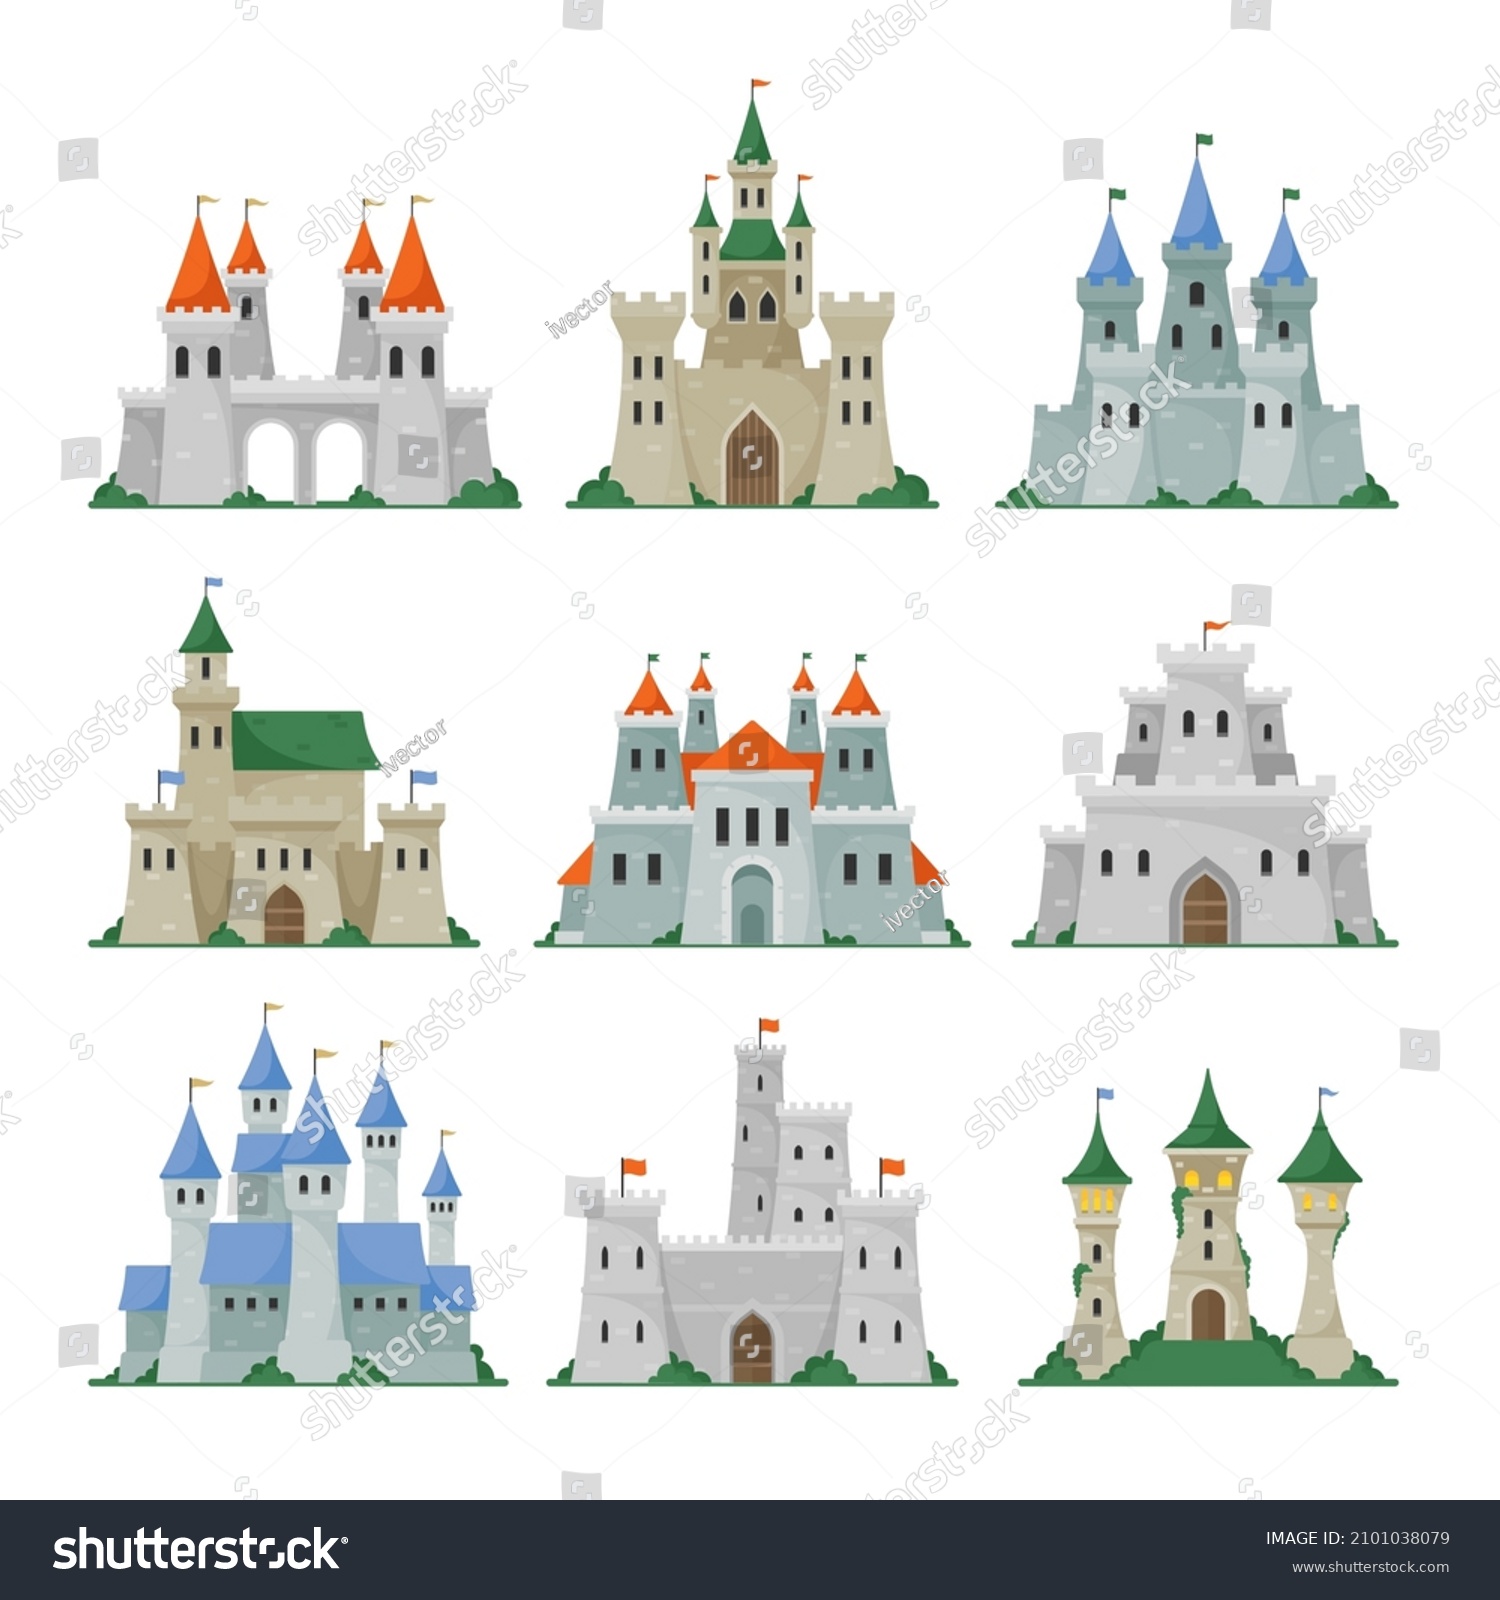 SVG of Set of Fairytale Castles, Medieval Towers, Fantasy Palace Buildings in Fairyland Kingdom . Fabulous Historical Bastion, Fortress Construction Isolated on White Background. Cartoon Vector Illustration svg